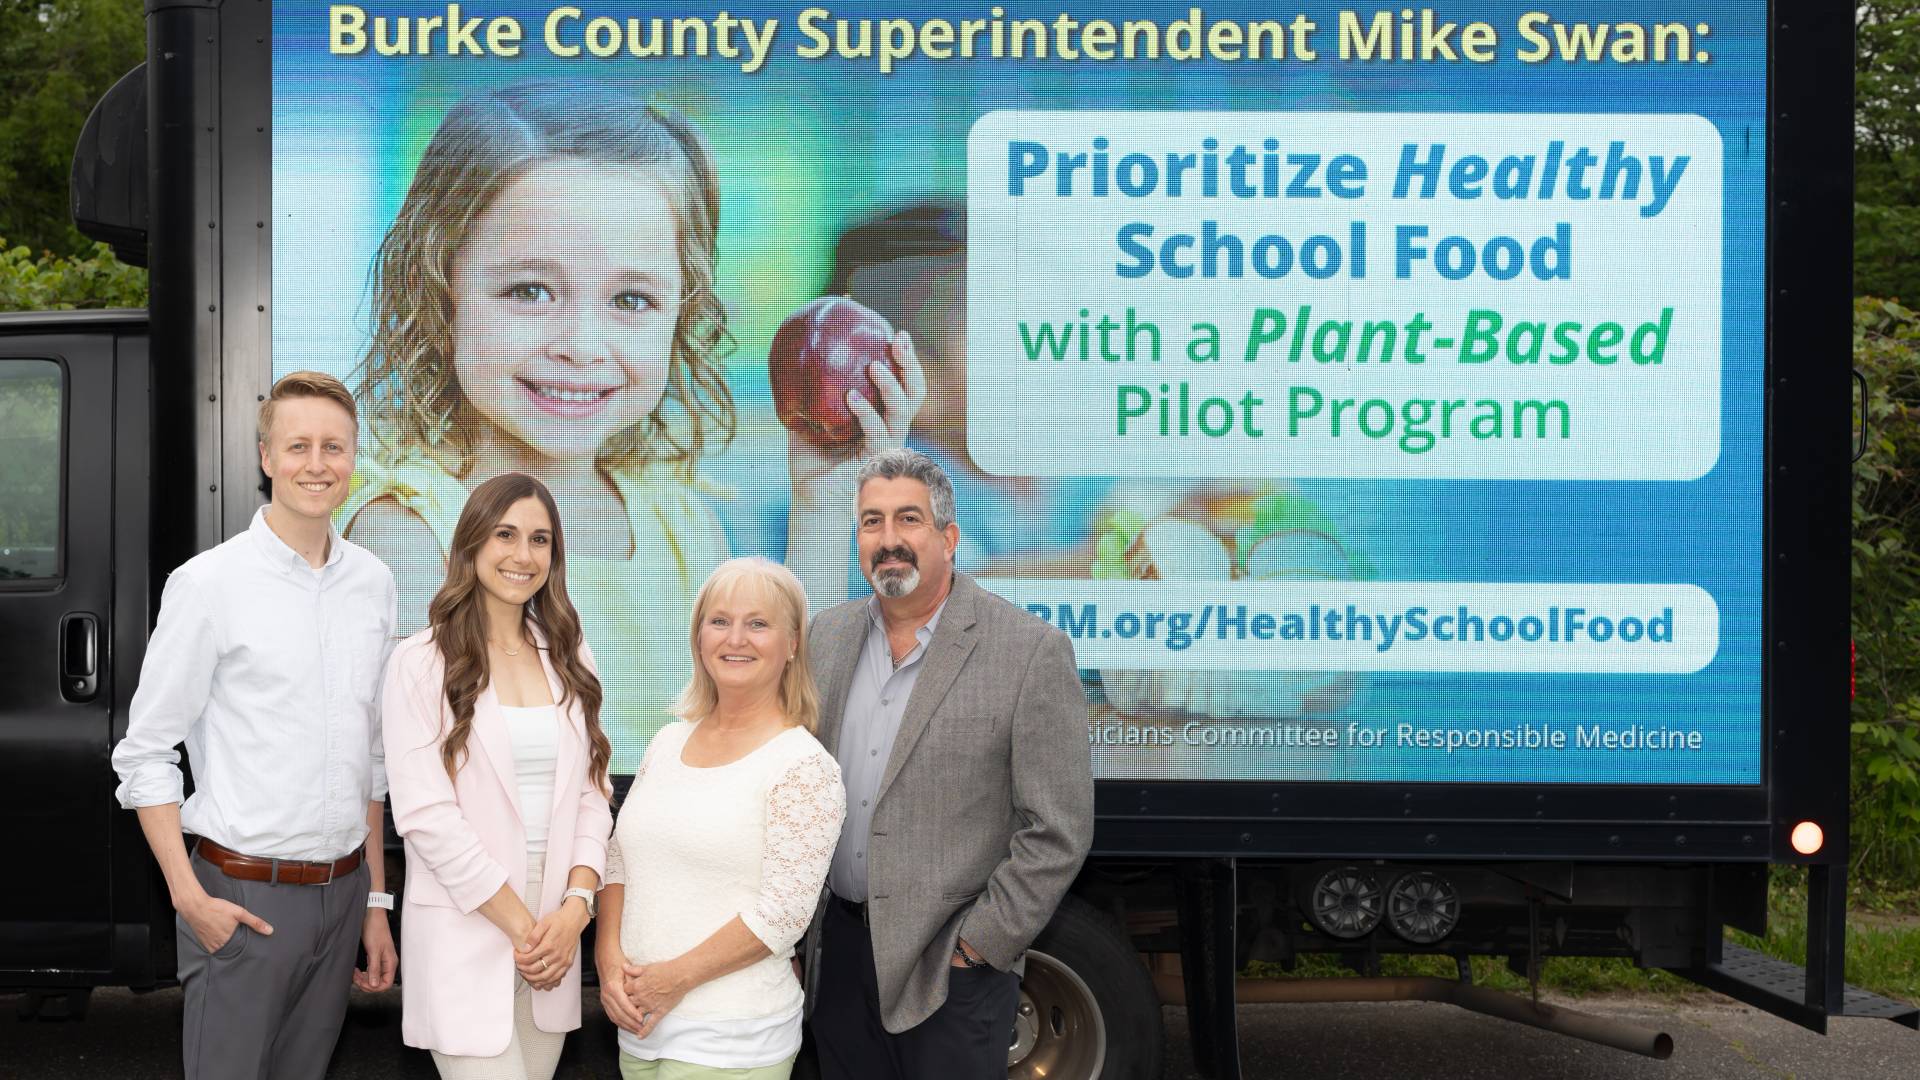 National Physicians Group Offers North Carolina School District $4K to Pay for Plant-Based School Lunch Pilot Program